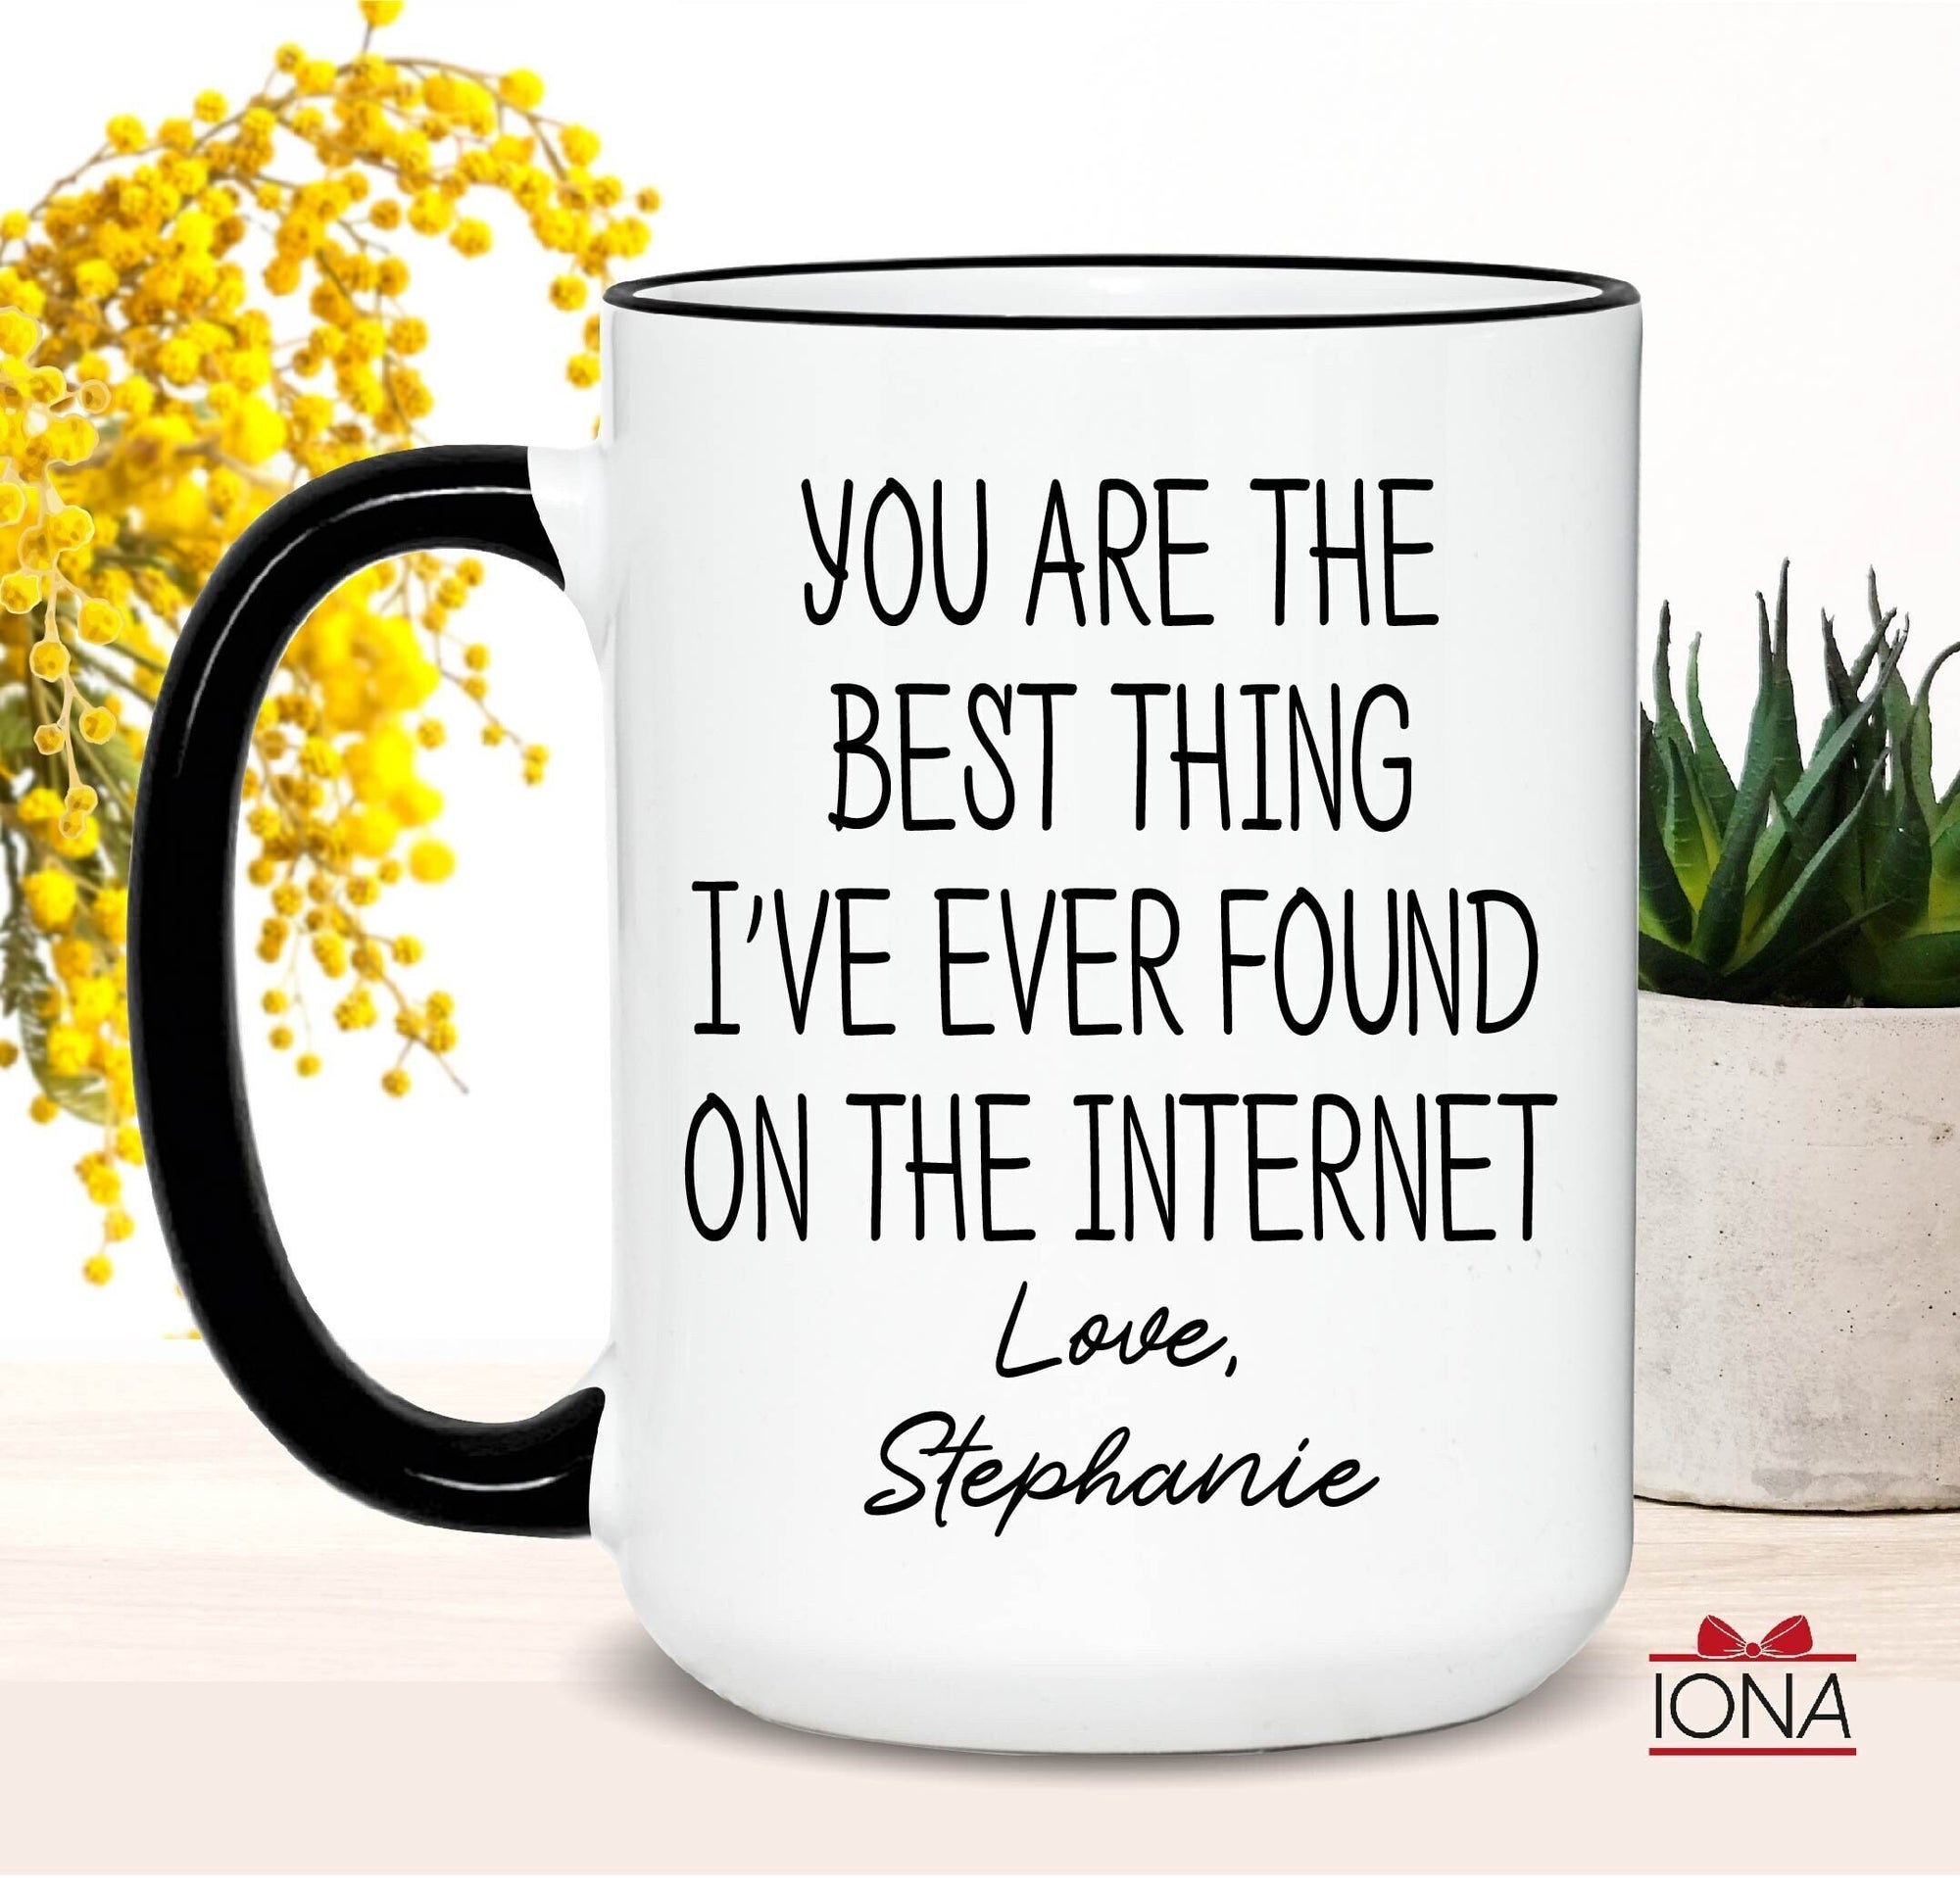 Funny Mug For Boyfriend Girlfriend Valentines Day funny Gift For Her Him, Personalized Name Gift, Best Thing I ever found on the internet